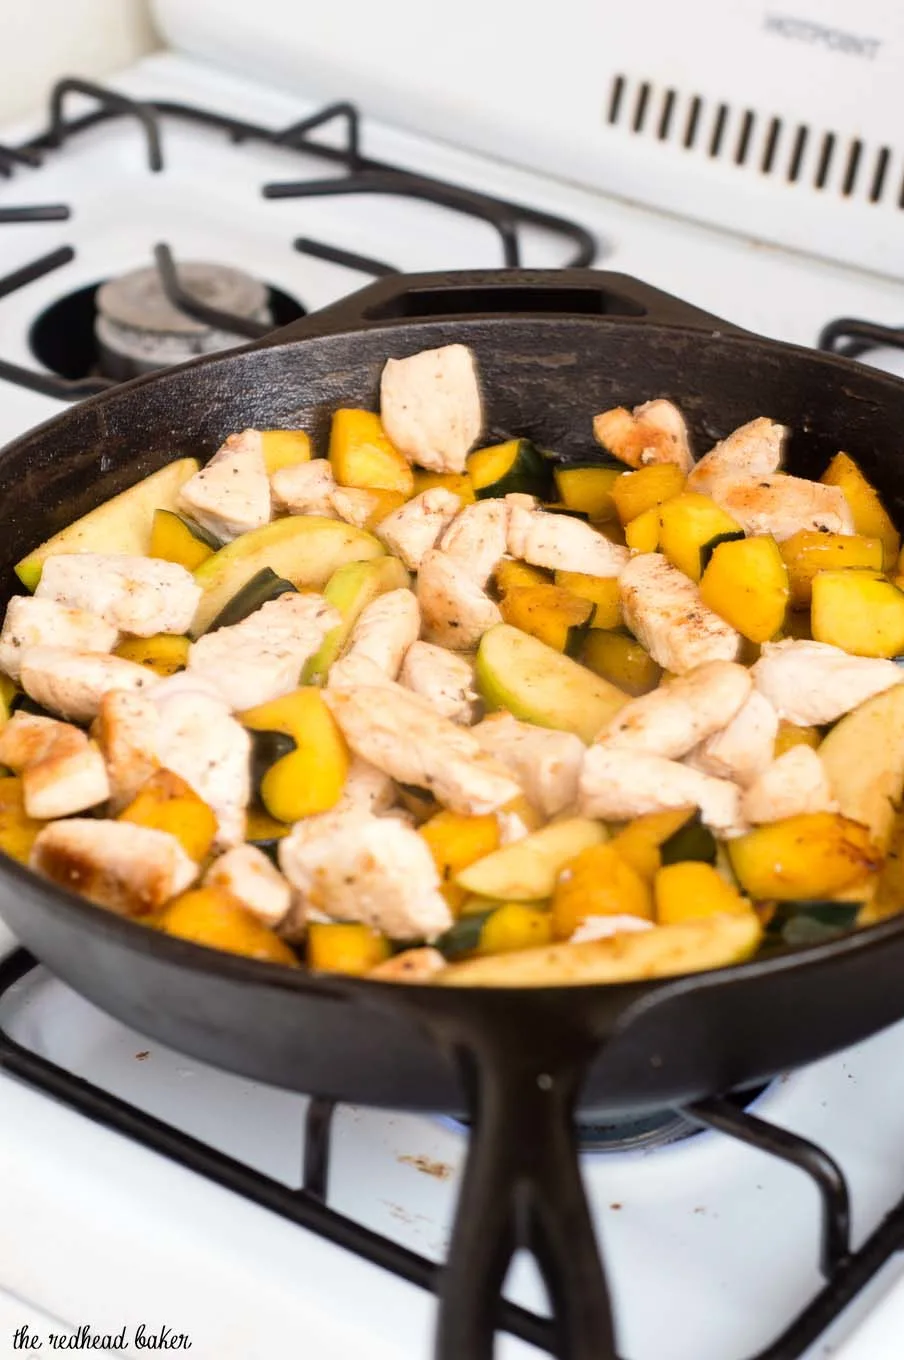 This apple, squash and chicken skillet meal is perfect for busy weeknights: ready in under 30 minutes, and only one pan to wash! #SundaySupper